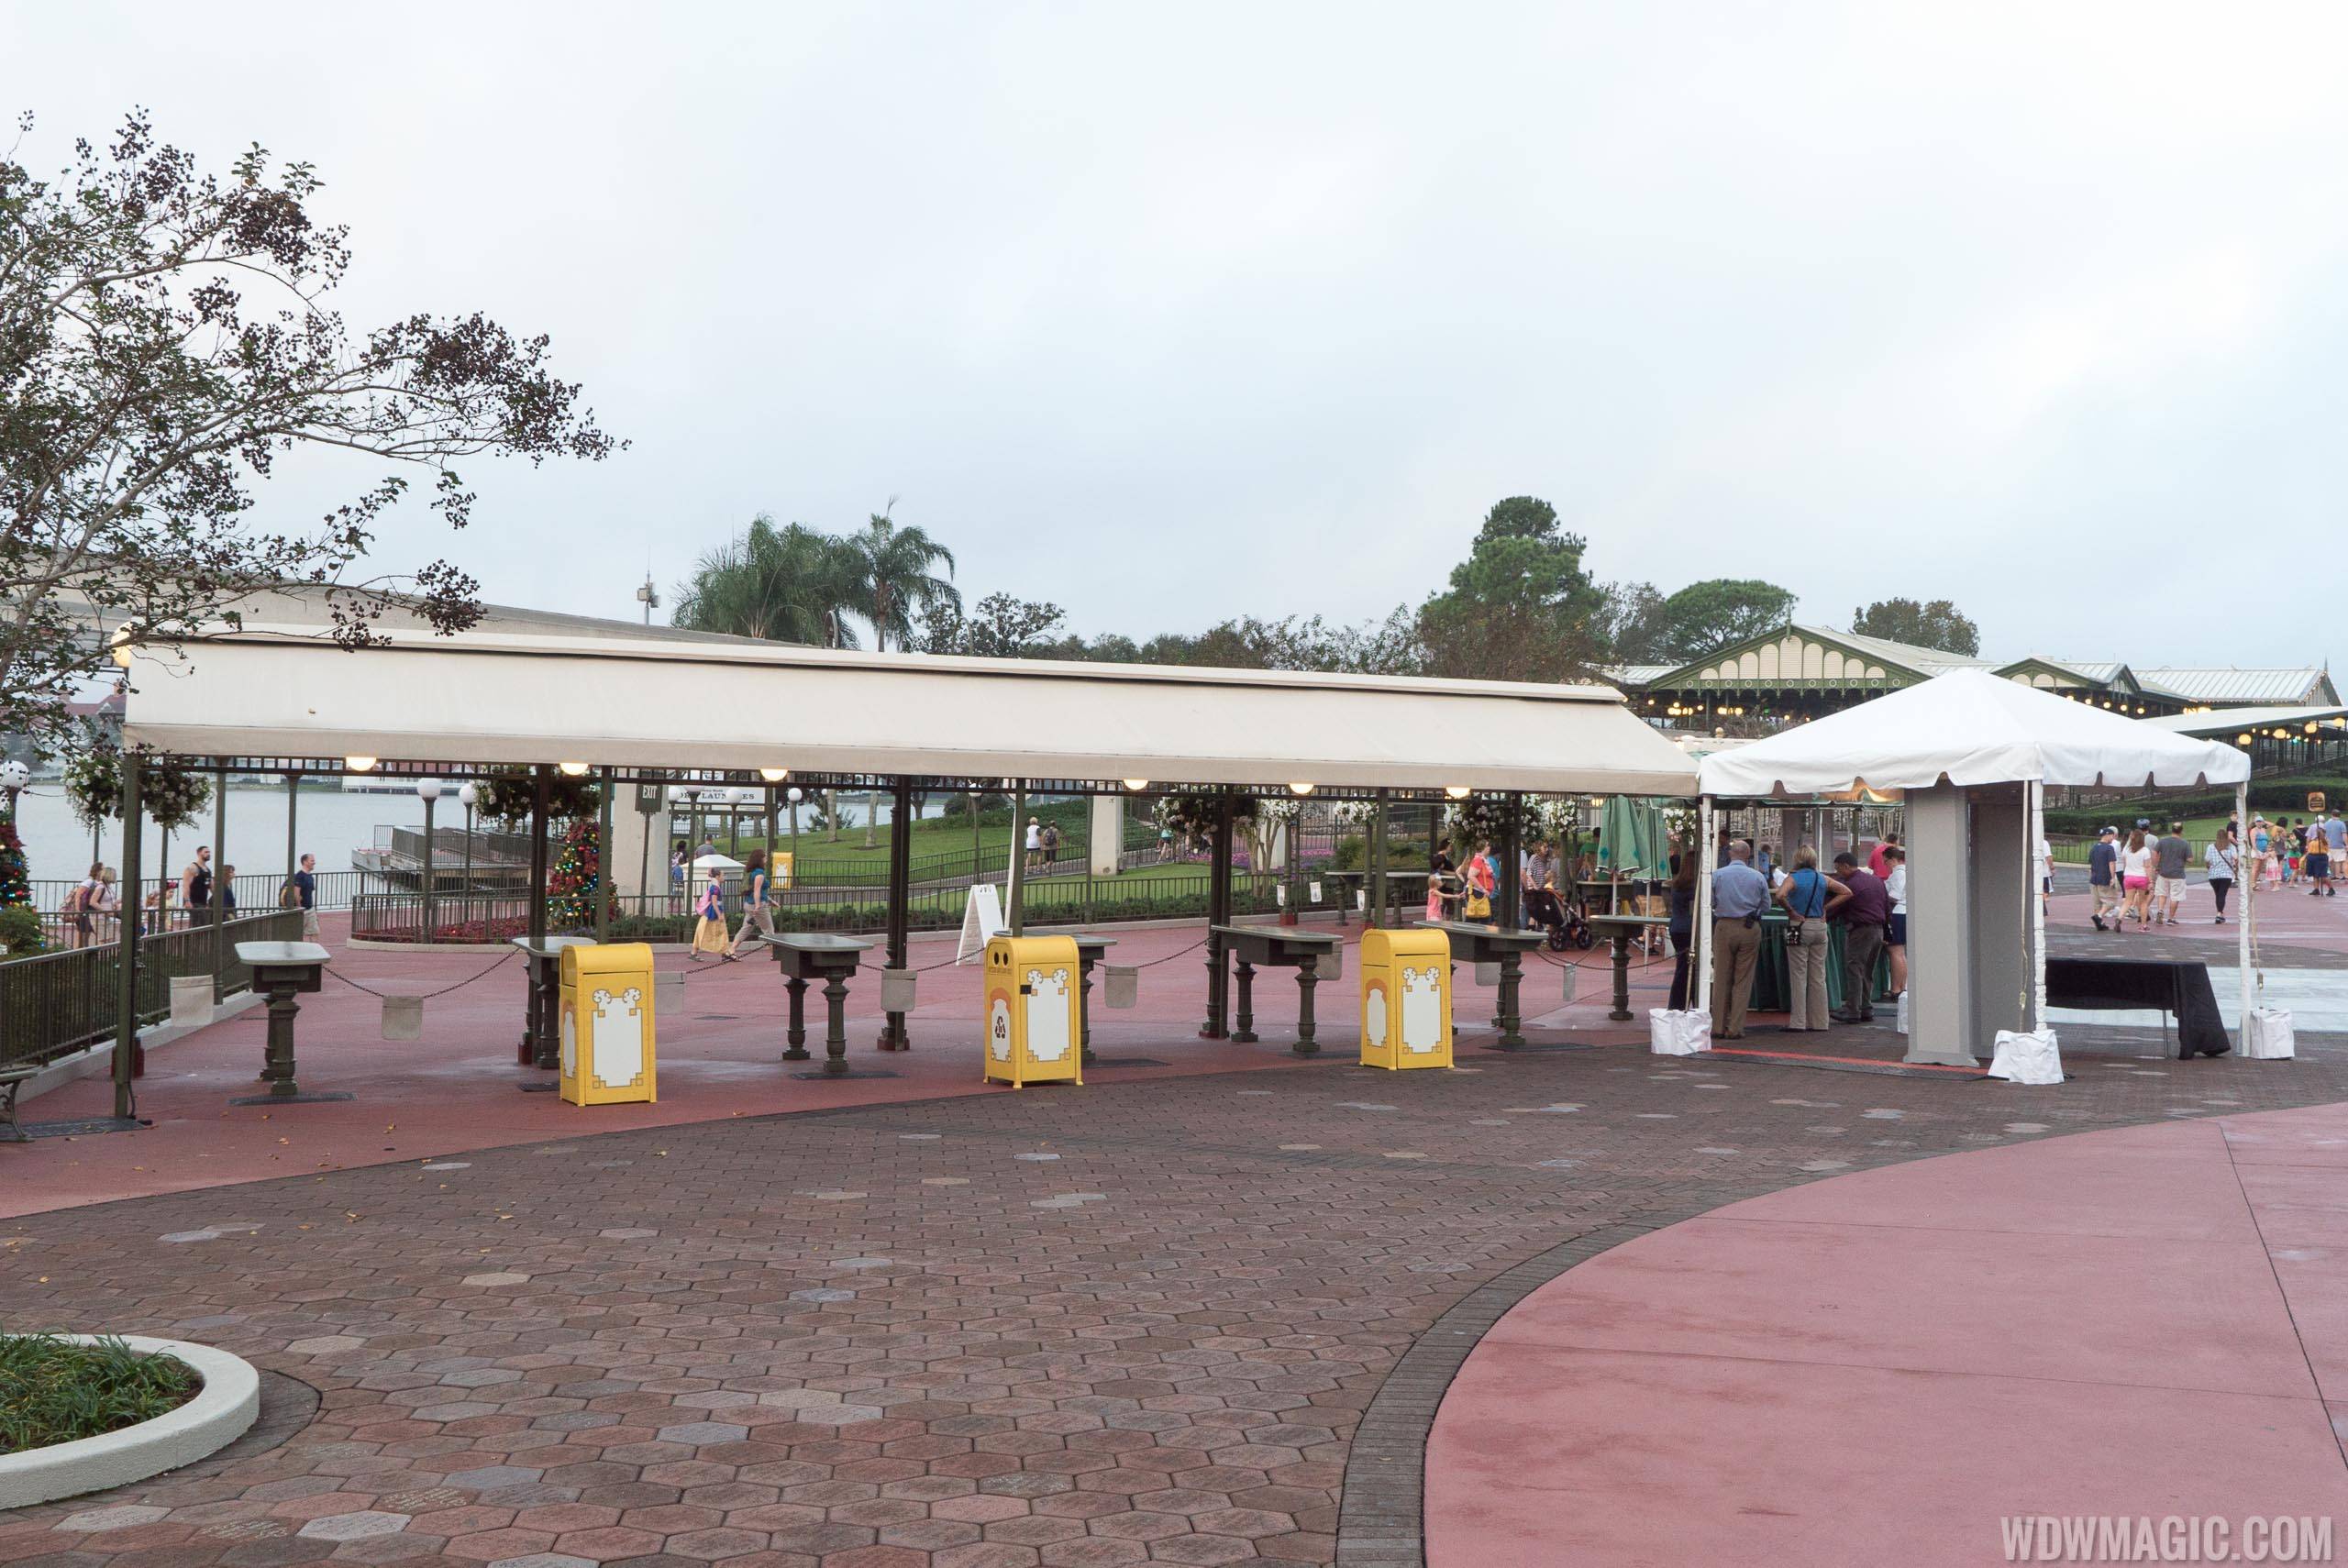 PHOTOS - Disney adds metal detectors at park entrances along with ban on toy guns and costumes for adults